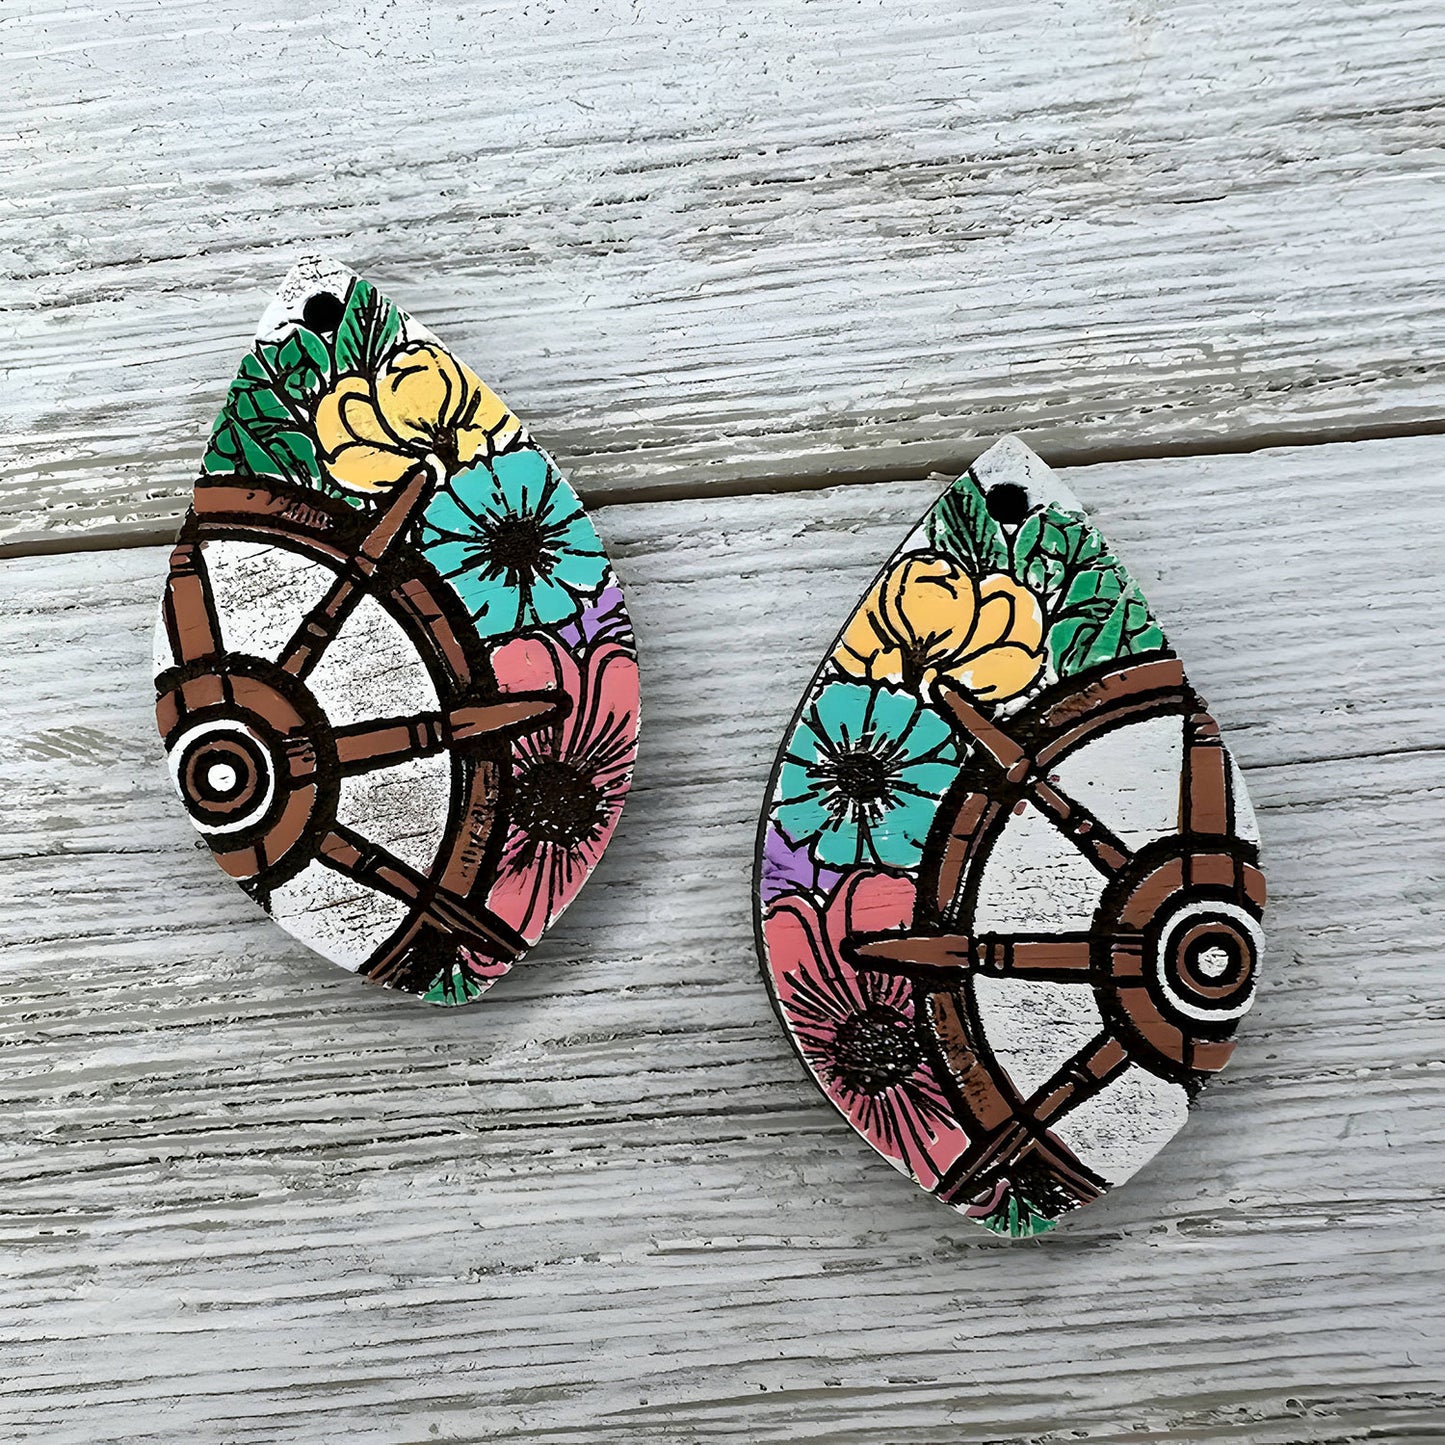 Floral Nautical-Themed Teardrop Earrings - "Ship's Wheel and Flowers"